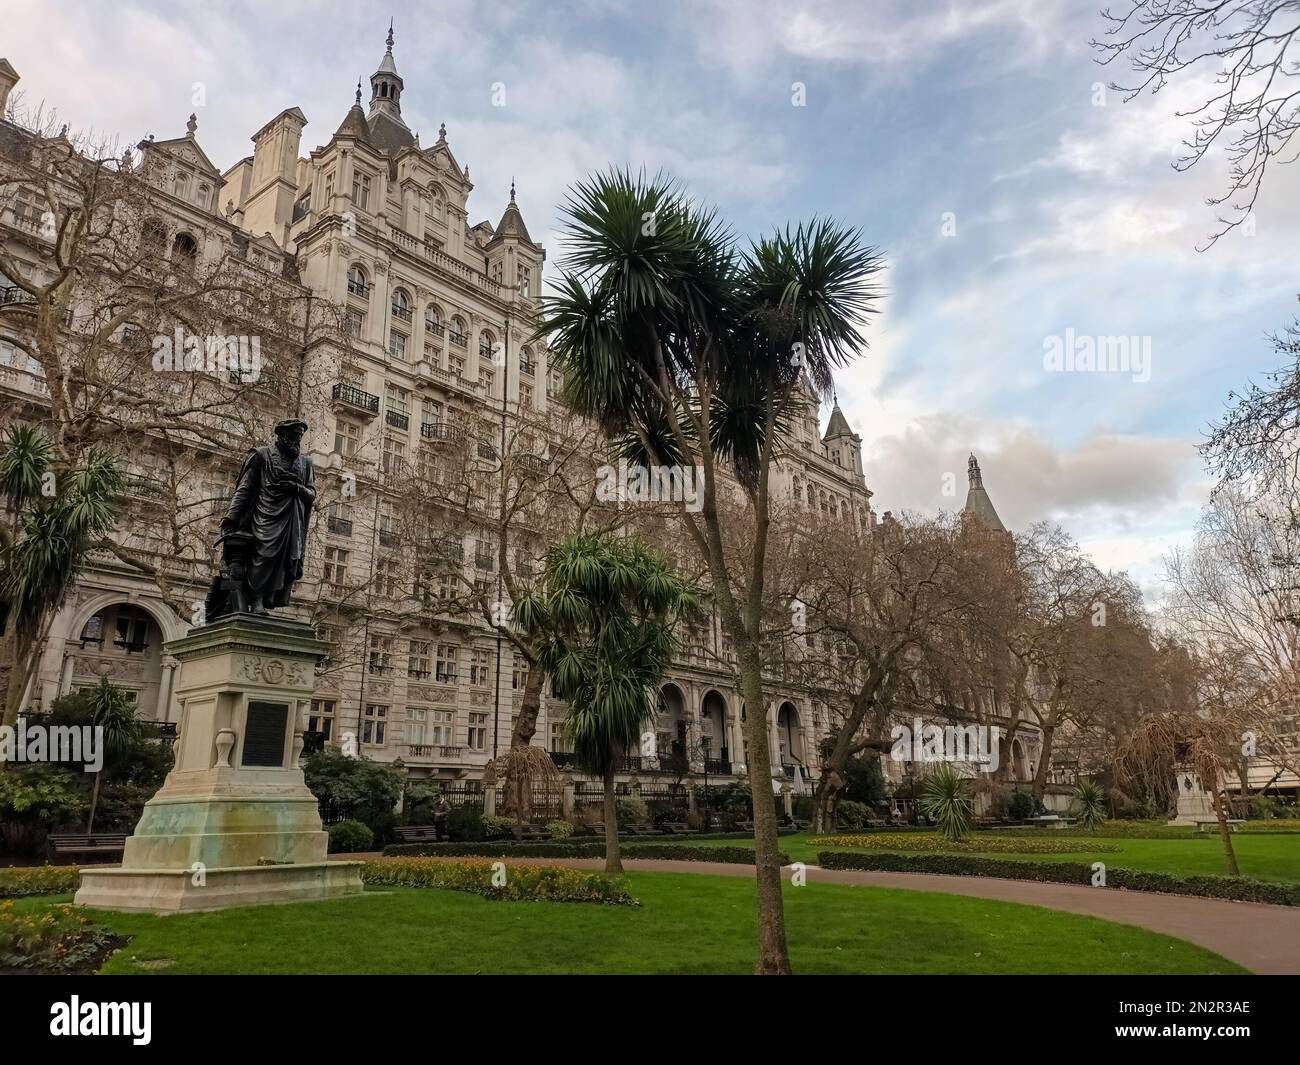 The picturesque Whitehall Gardens near the River Thames in London, UK Stock Photo